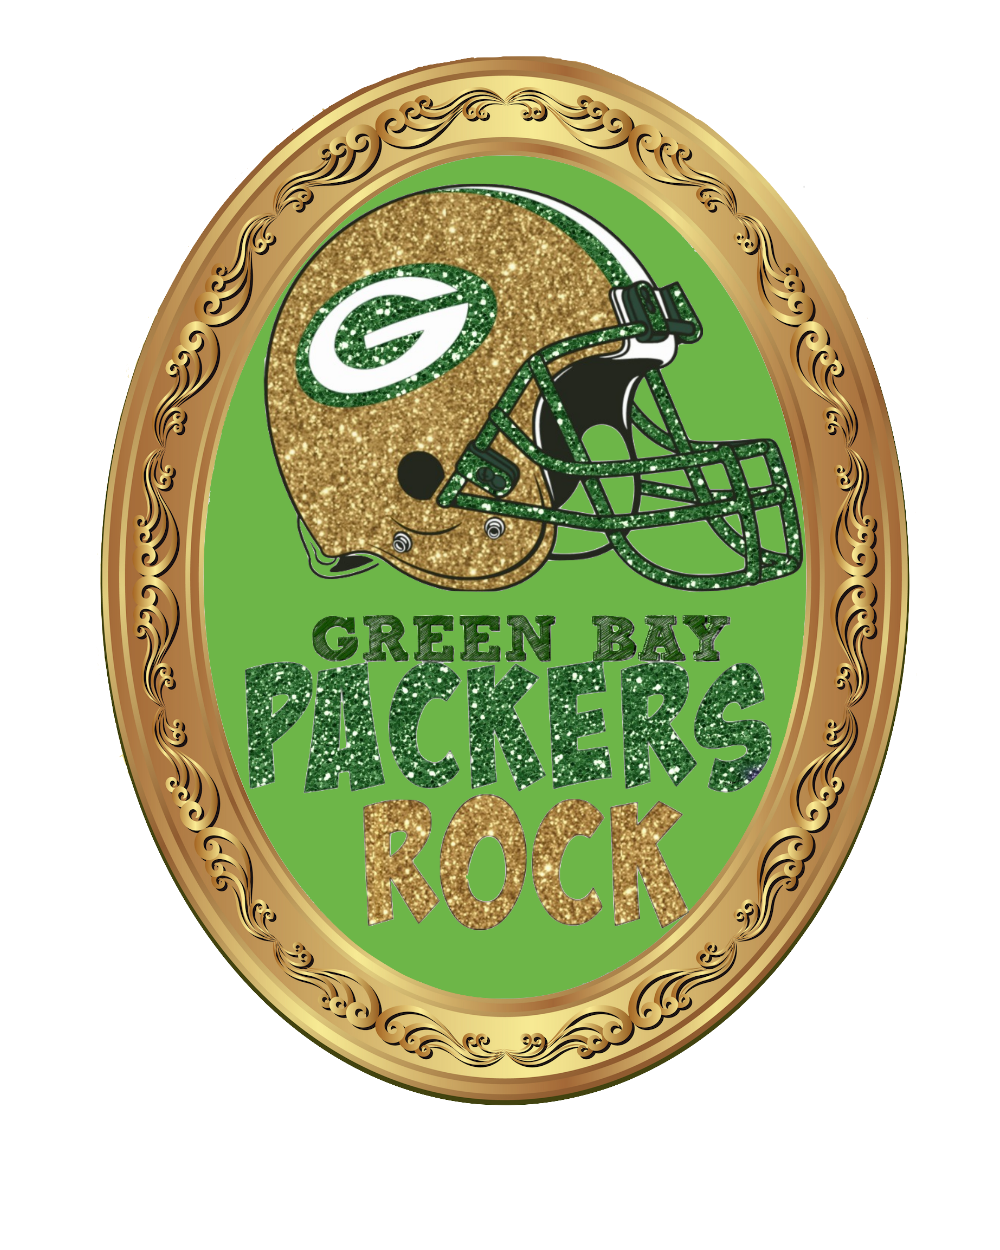 Green Bay Packers Bundle!   Green Bay Packers Rock -  Sports Football Team Clip Art SCROLL TO THE ITEM YOU WANT TO DOWNLOAD